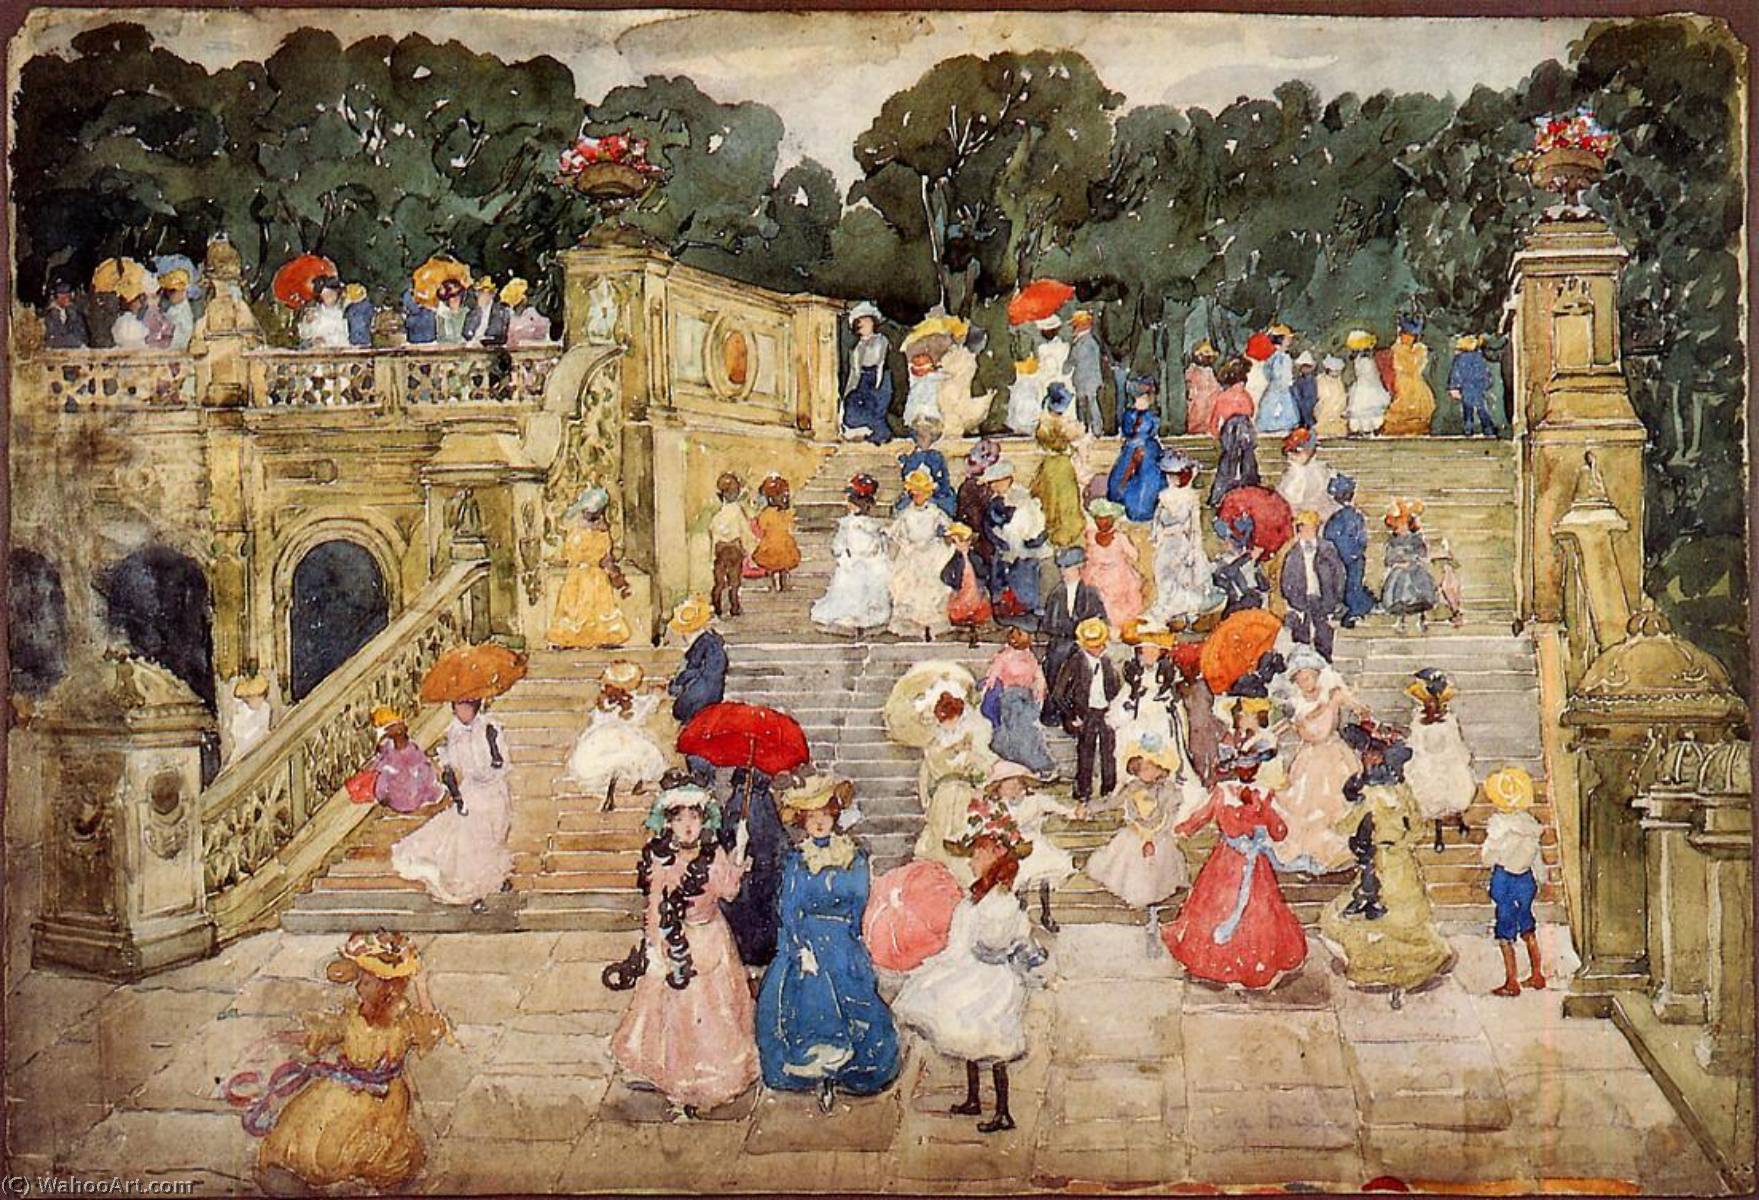 WikiOO.org - Encyclopedia of Fine Arts - Maalaus, taideteos Maurice Brazil Prendergast - The Mall, Central Park (also known as Steps, Central Park or The Terrace Bridge, Central Park)